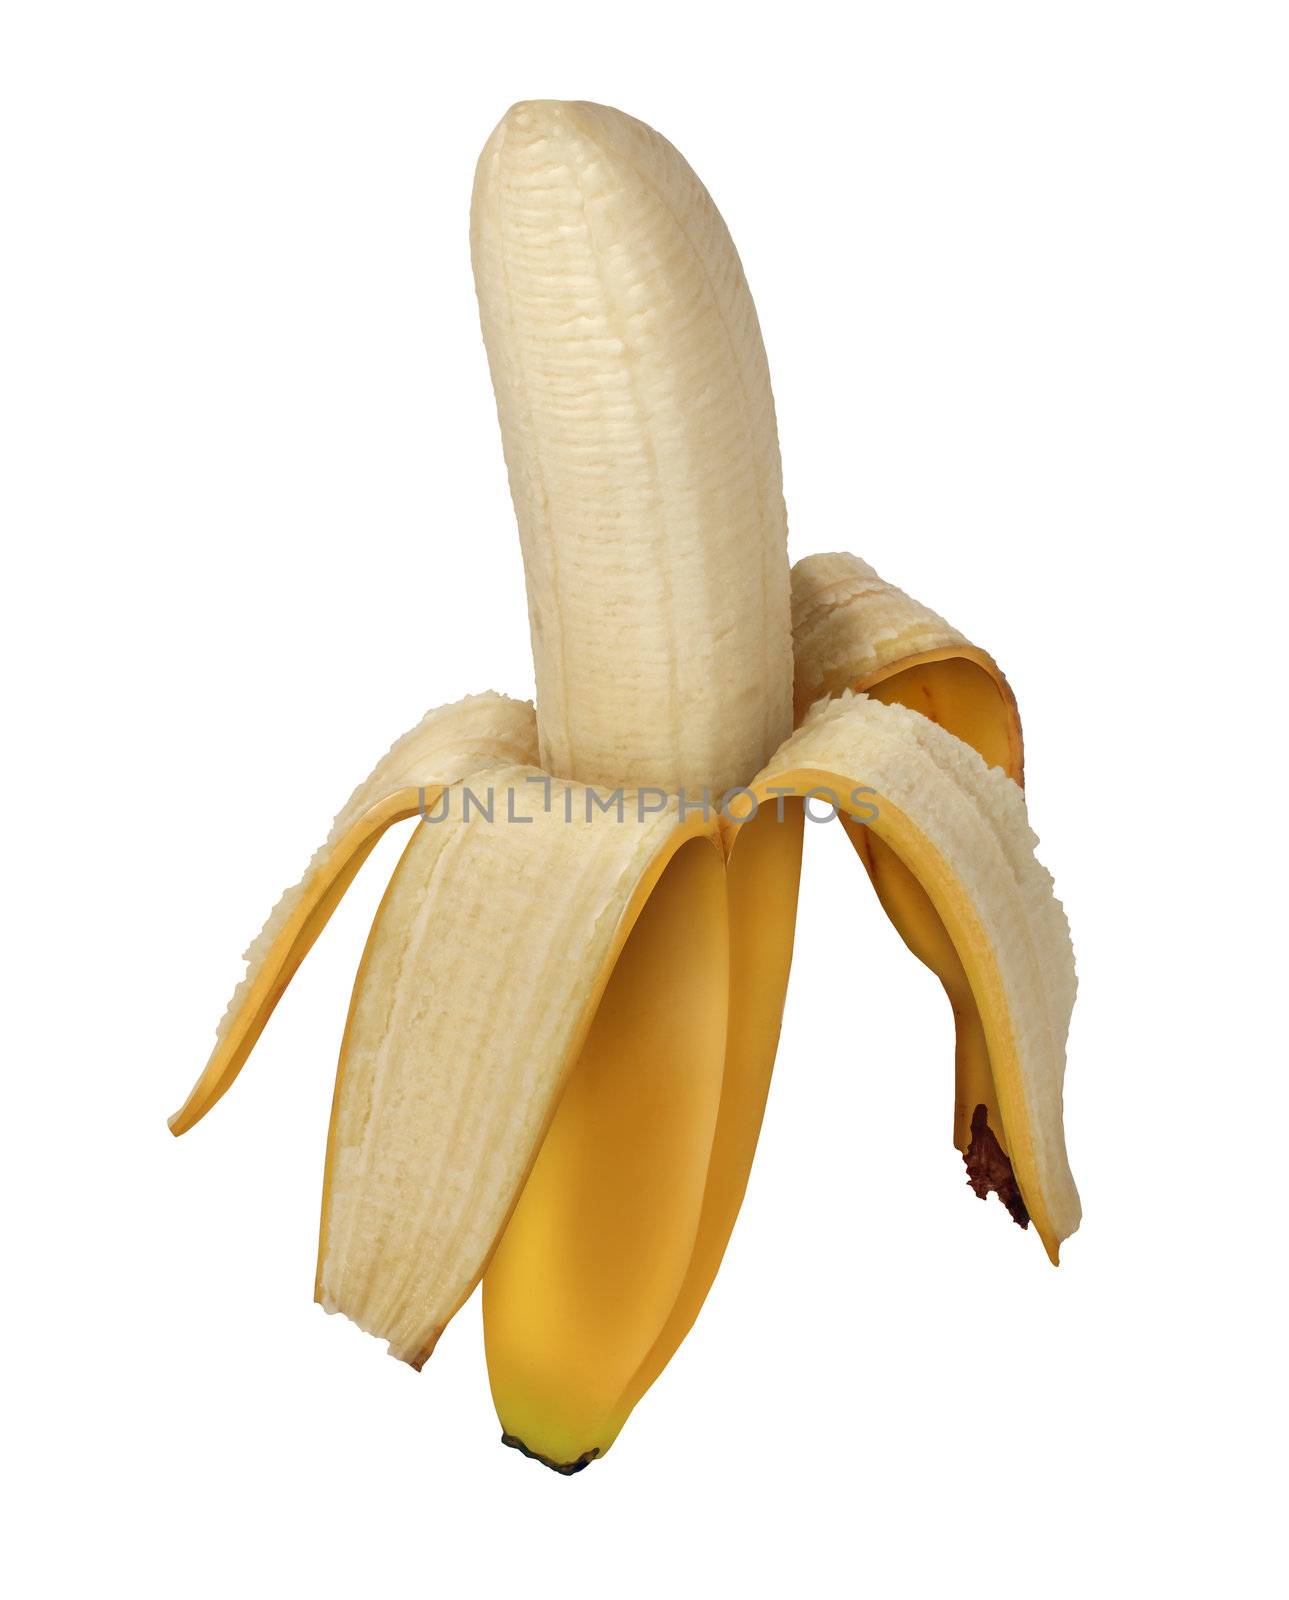 Banana peeled open as a fruits and vegetables symbol of healthy eating and organic cultivation as a ripe sweet nutritious health food from a tropical climate.